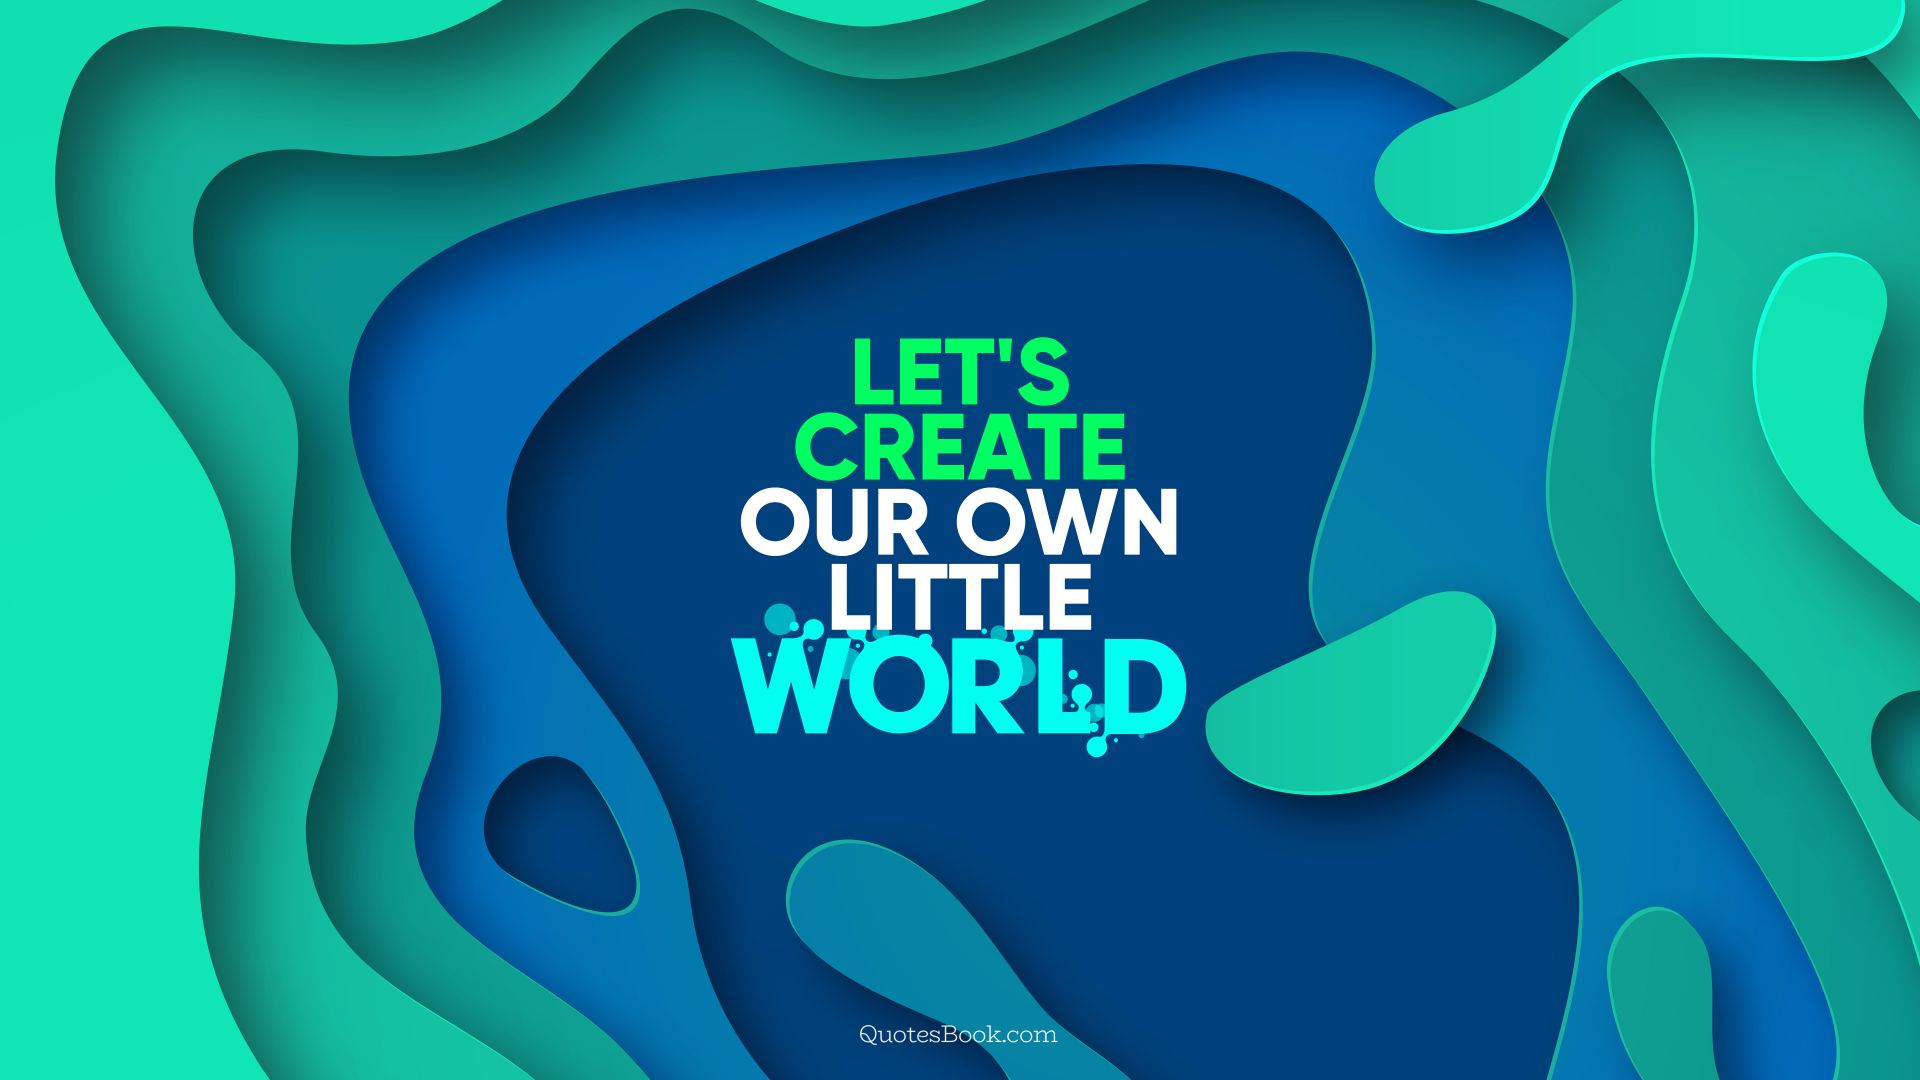 Let's create our own little world!. - Quote by QuotesBook